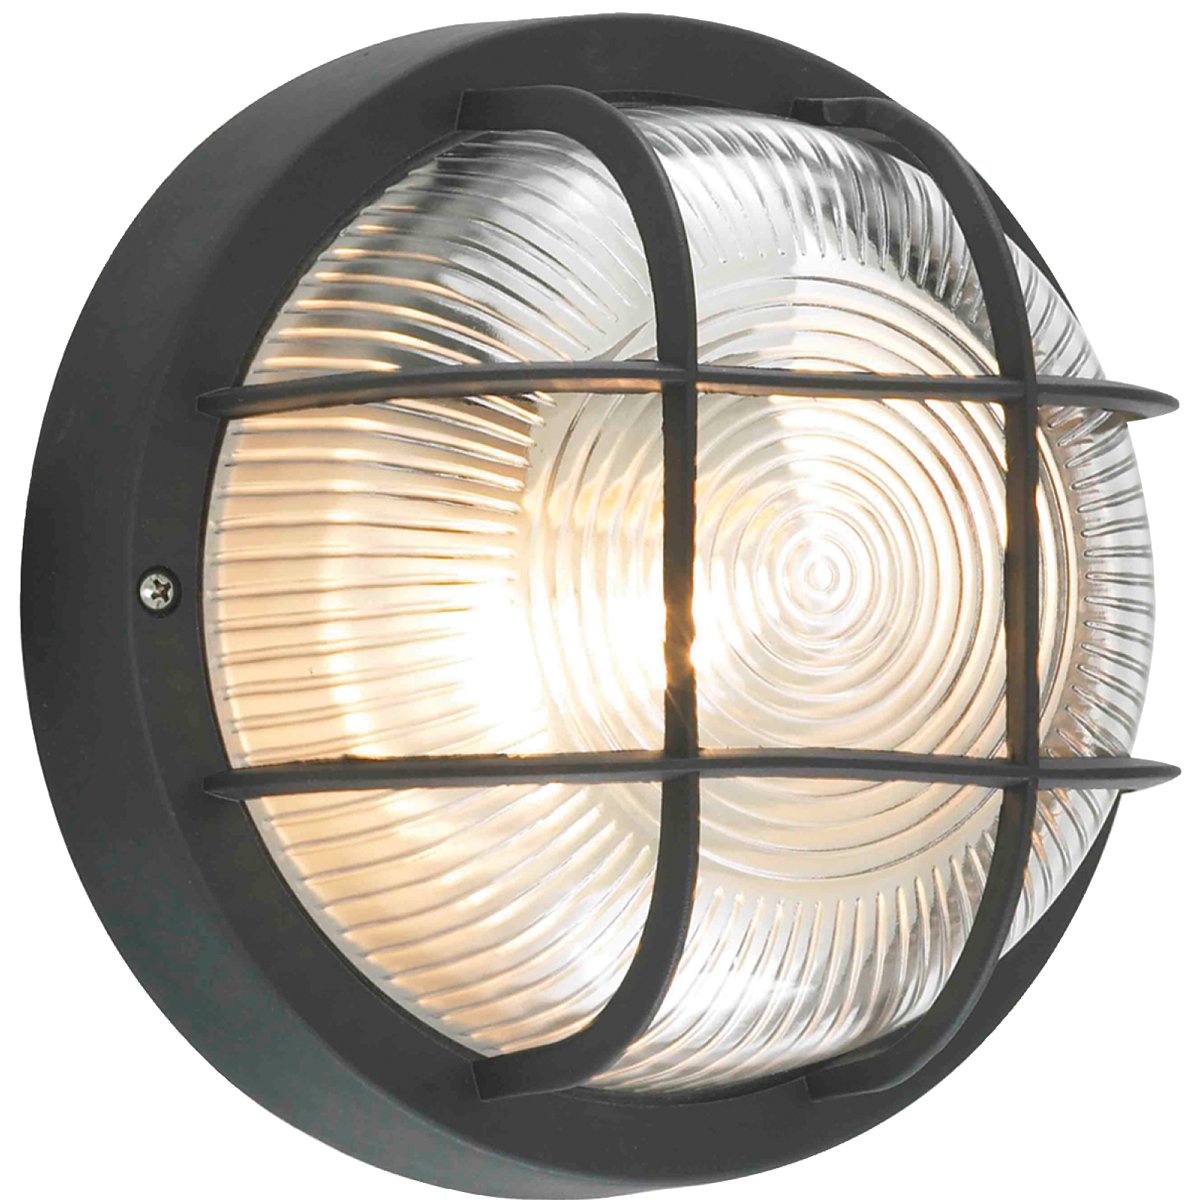 Ronnie cage round bulkhead is an optimal choice for illuminating doorways, patios, porches, driveways, garages, and sheds. Crafted of durable plastic with a glass prismatic diffuser, it offers a timeless aesthetic with reliable performance.